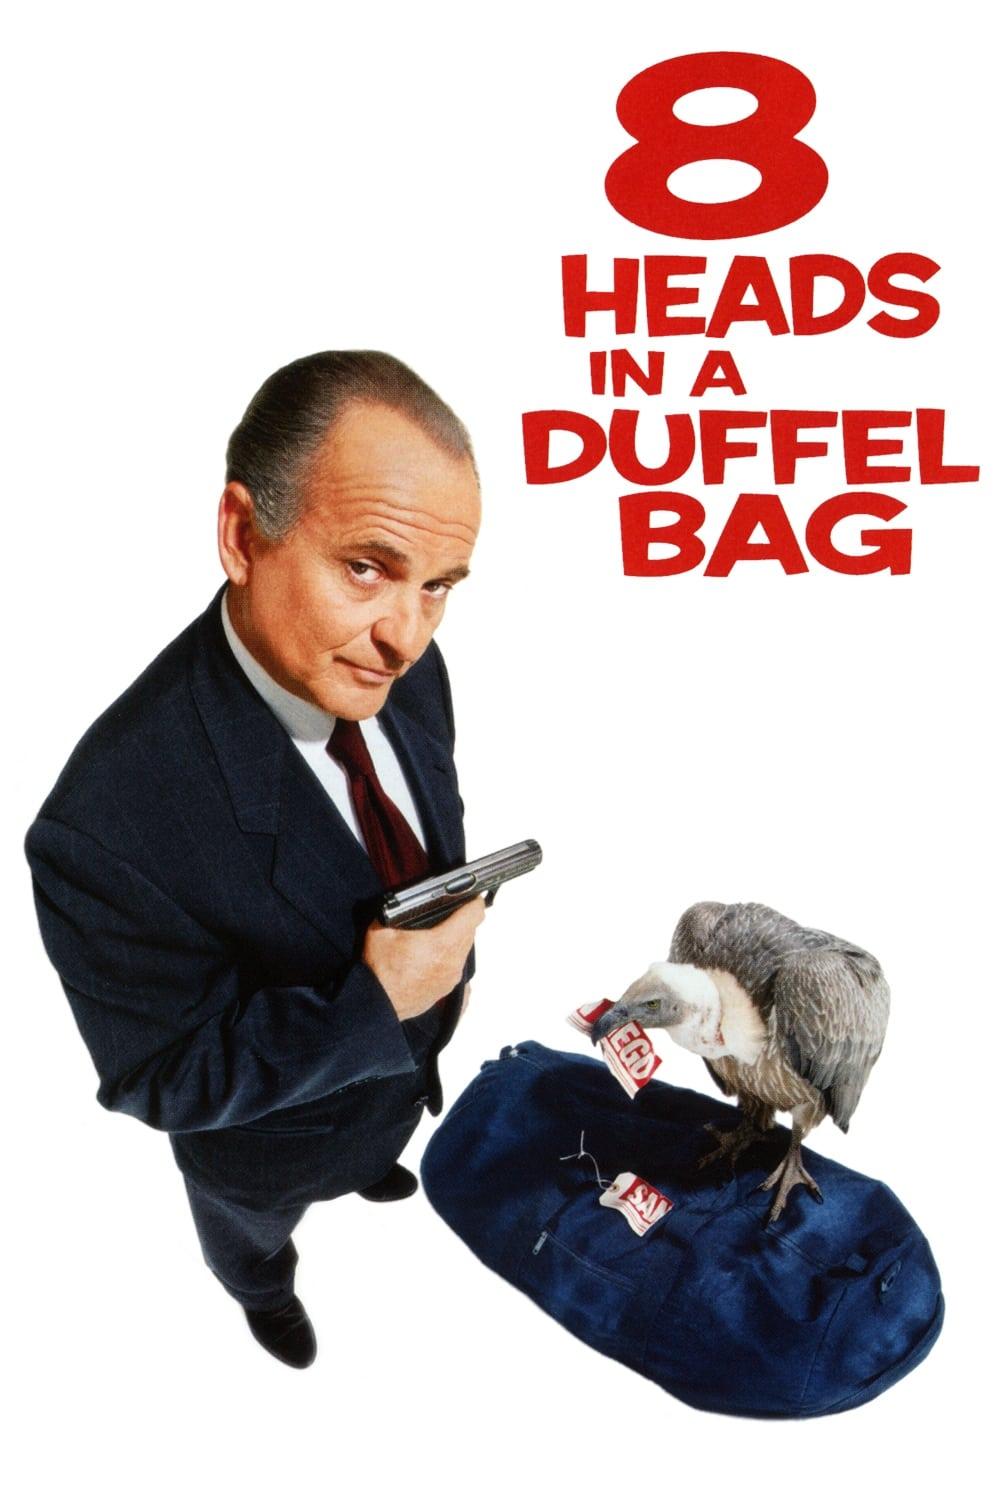 8 Heads in a Duffel Bag poster